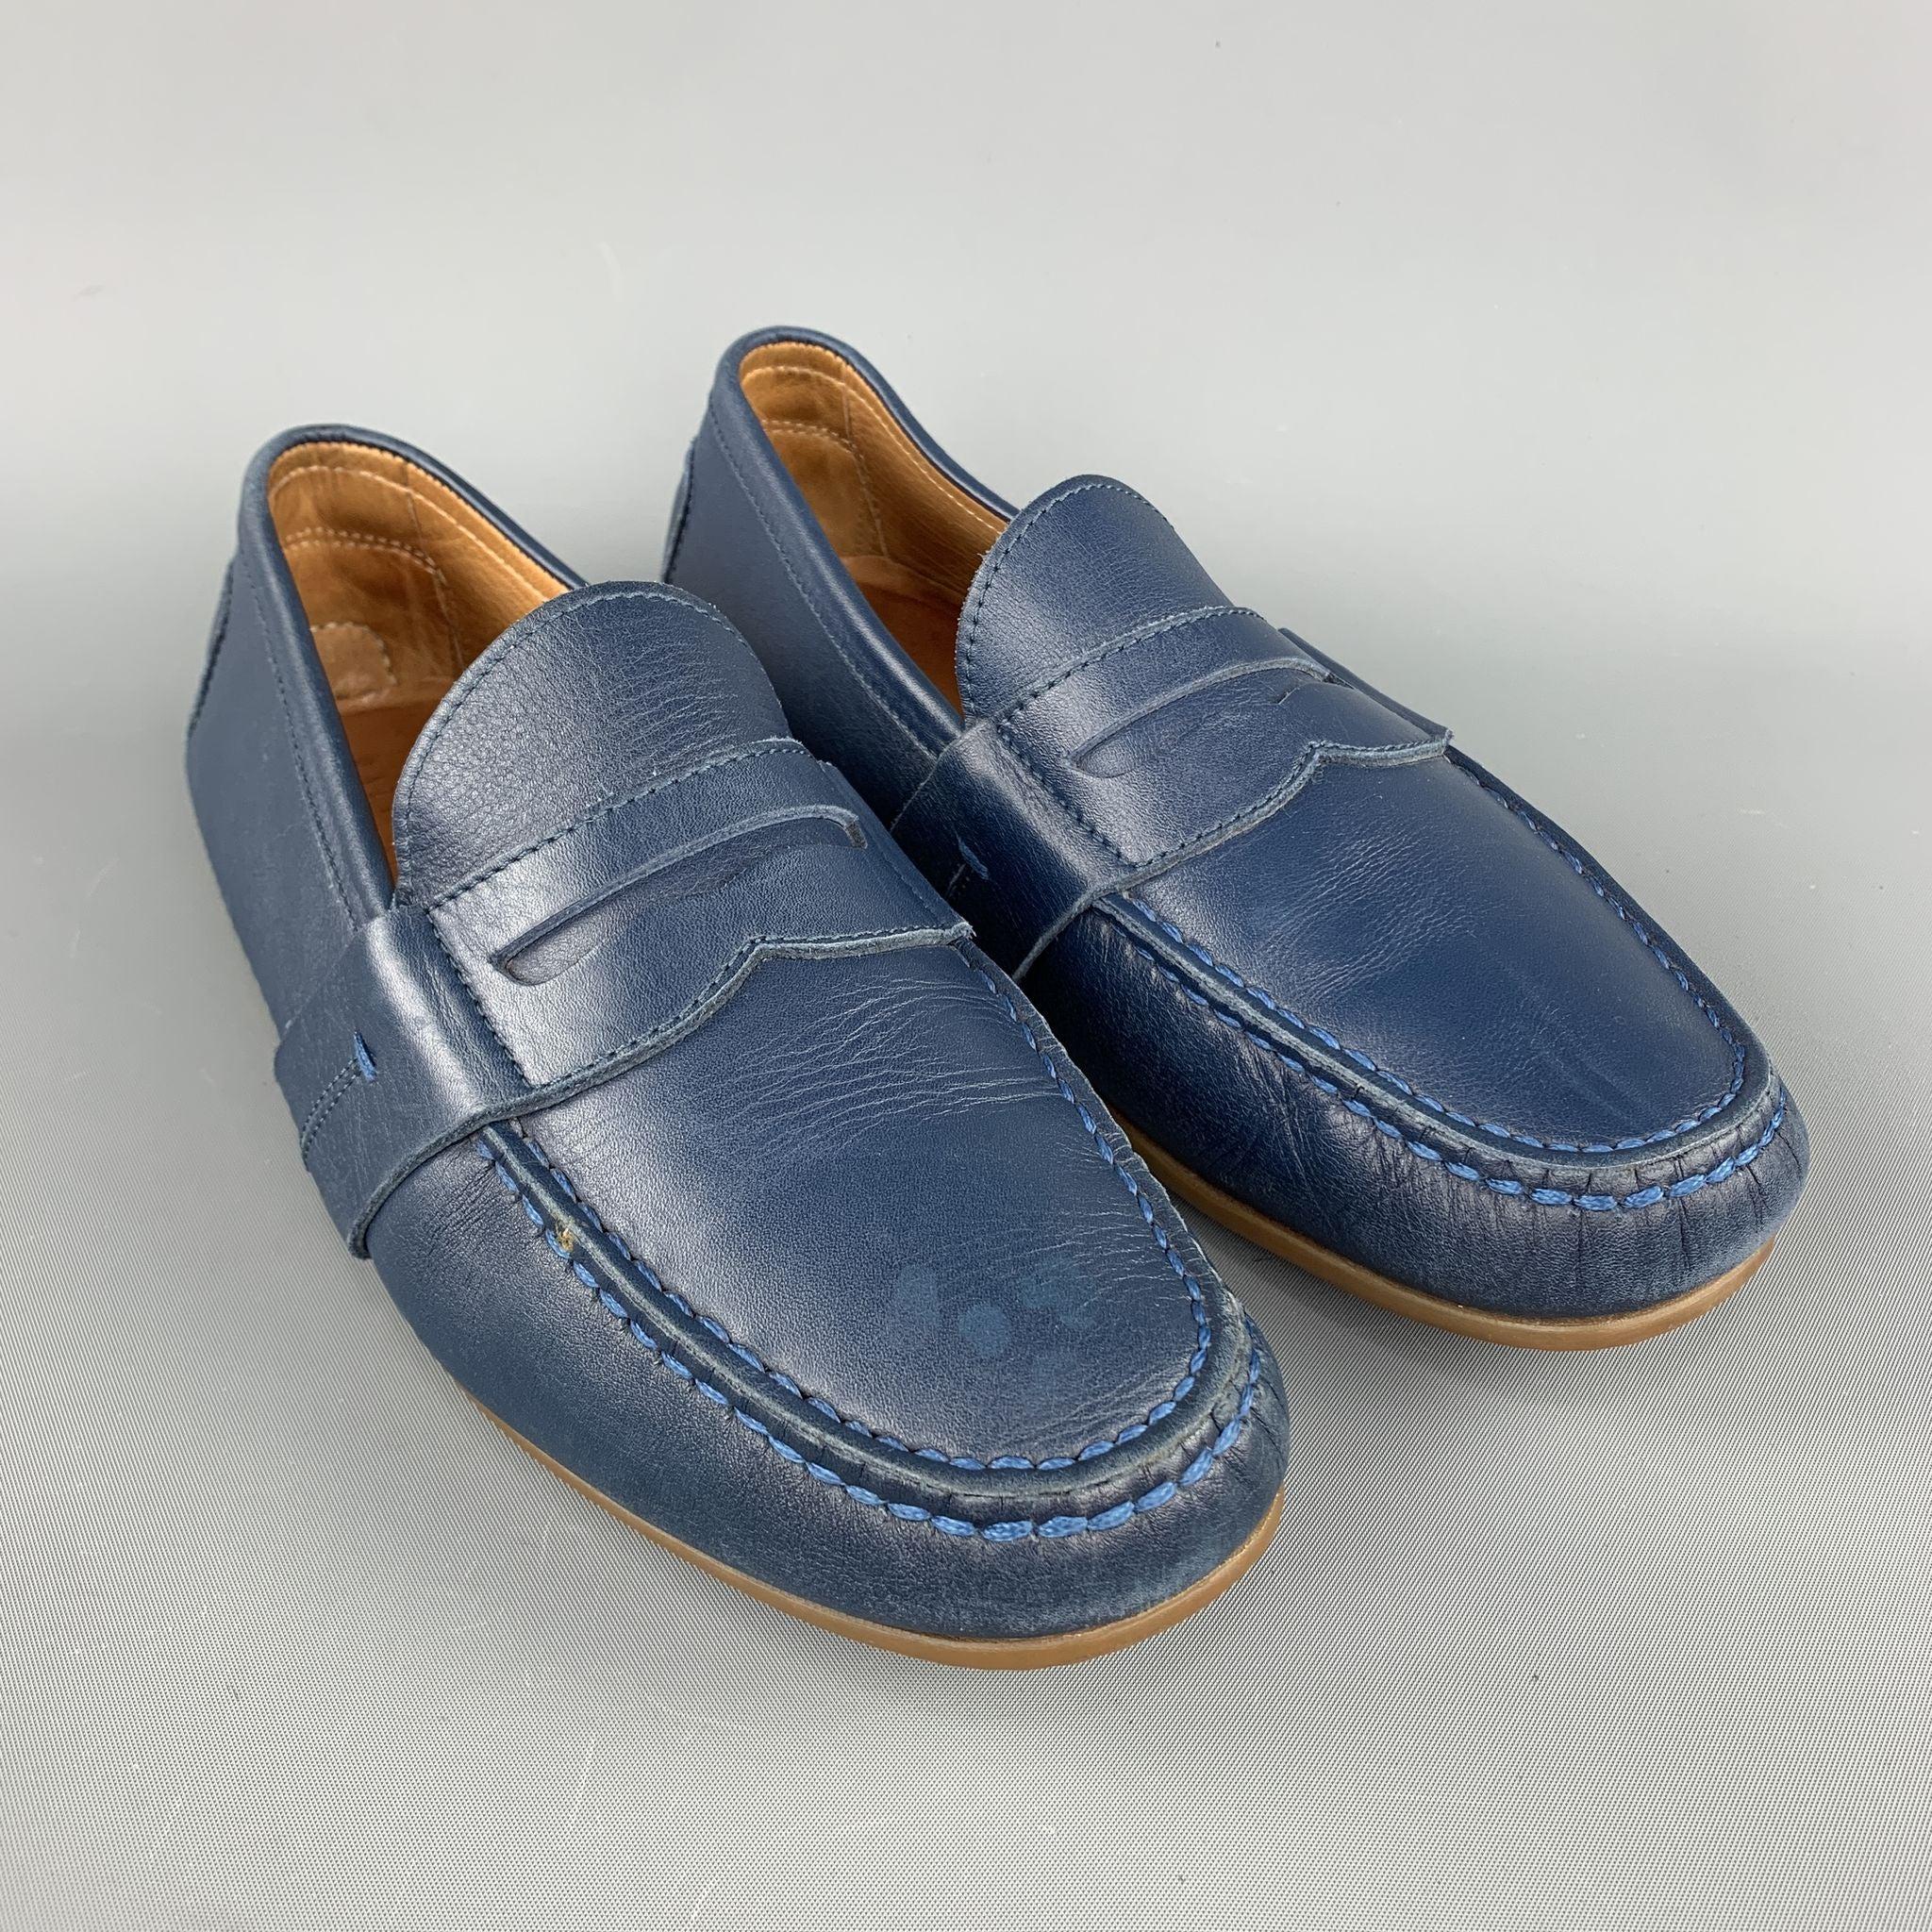 RALPH LAUREN loafers comes in a navy leather featuring a driver style, penny strap, and a rubber sole. Made in Italy.
Excellent Pre-Owned Condition.
 

Marked:   7.5 inches  
 

Measurements: 
  
l	Outsole: 10.5 in x 3 inches  

  
  
  
